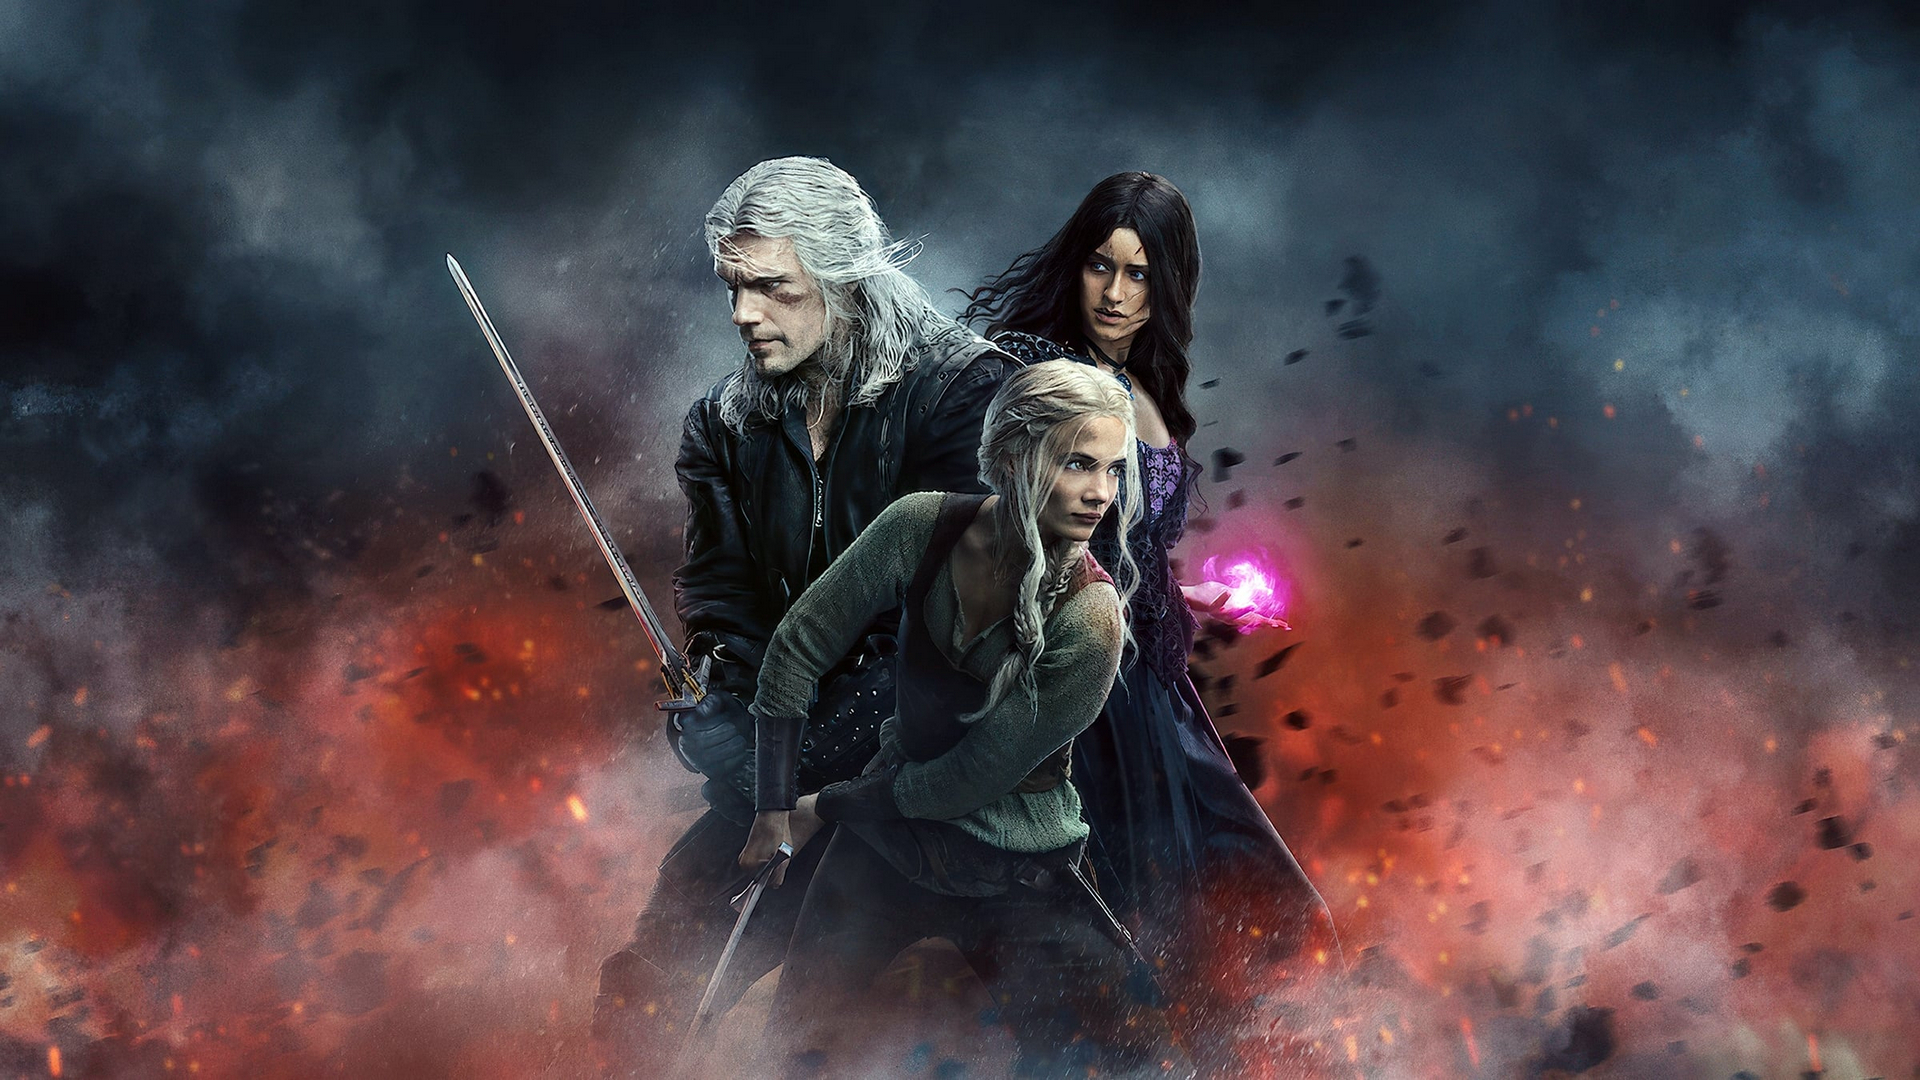 People 1920x1080 The Witcher (TV Series) group of people Geralt of Rivia Cirilla Fiona Elen Riannon Yennefer of Vengerberg Henry Cavill Anya Chalotra Freya Allan sword